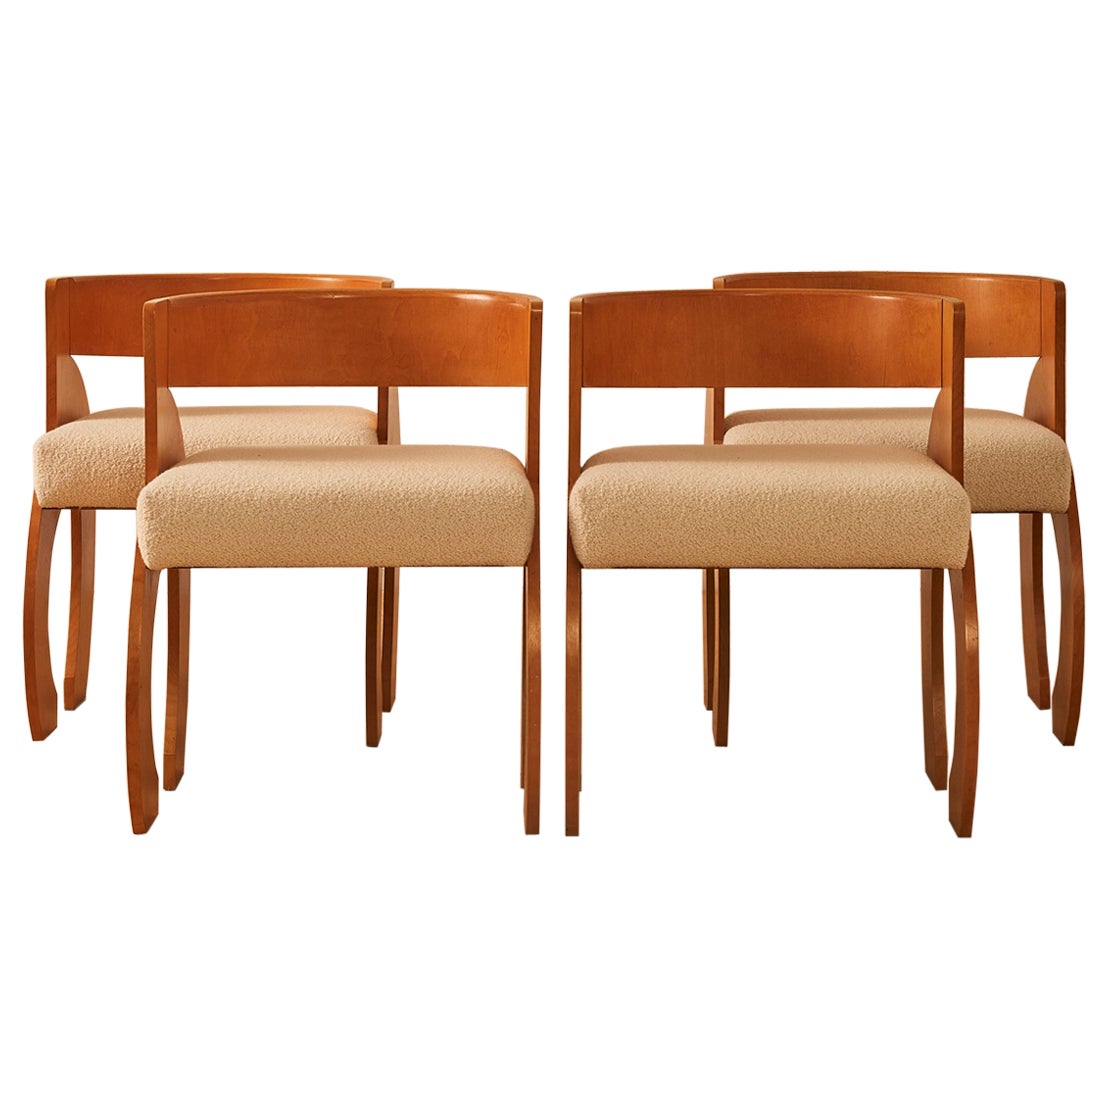 Set of 4 Sculptural Dining Chairs Attr. to Gerald Summers